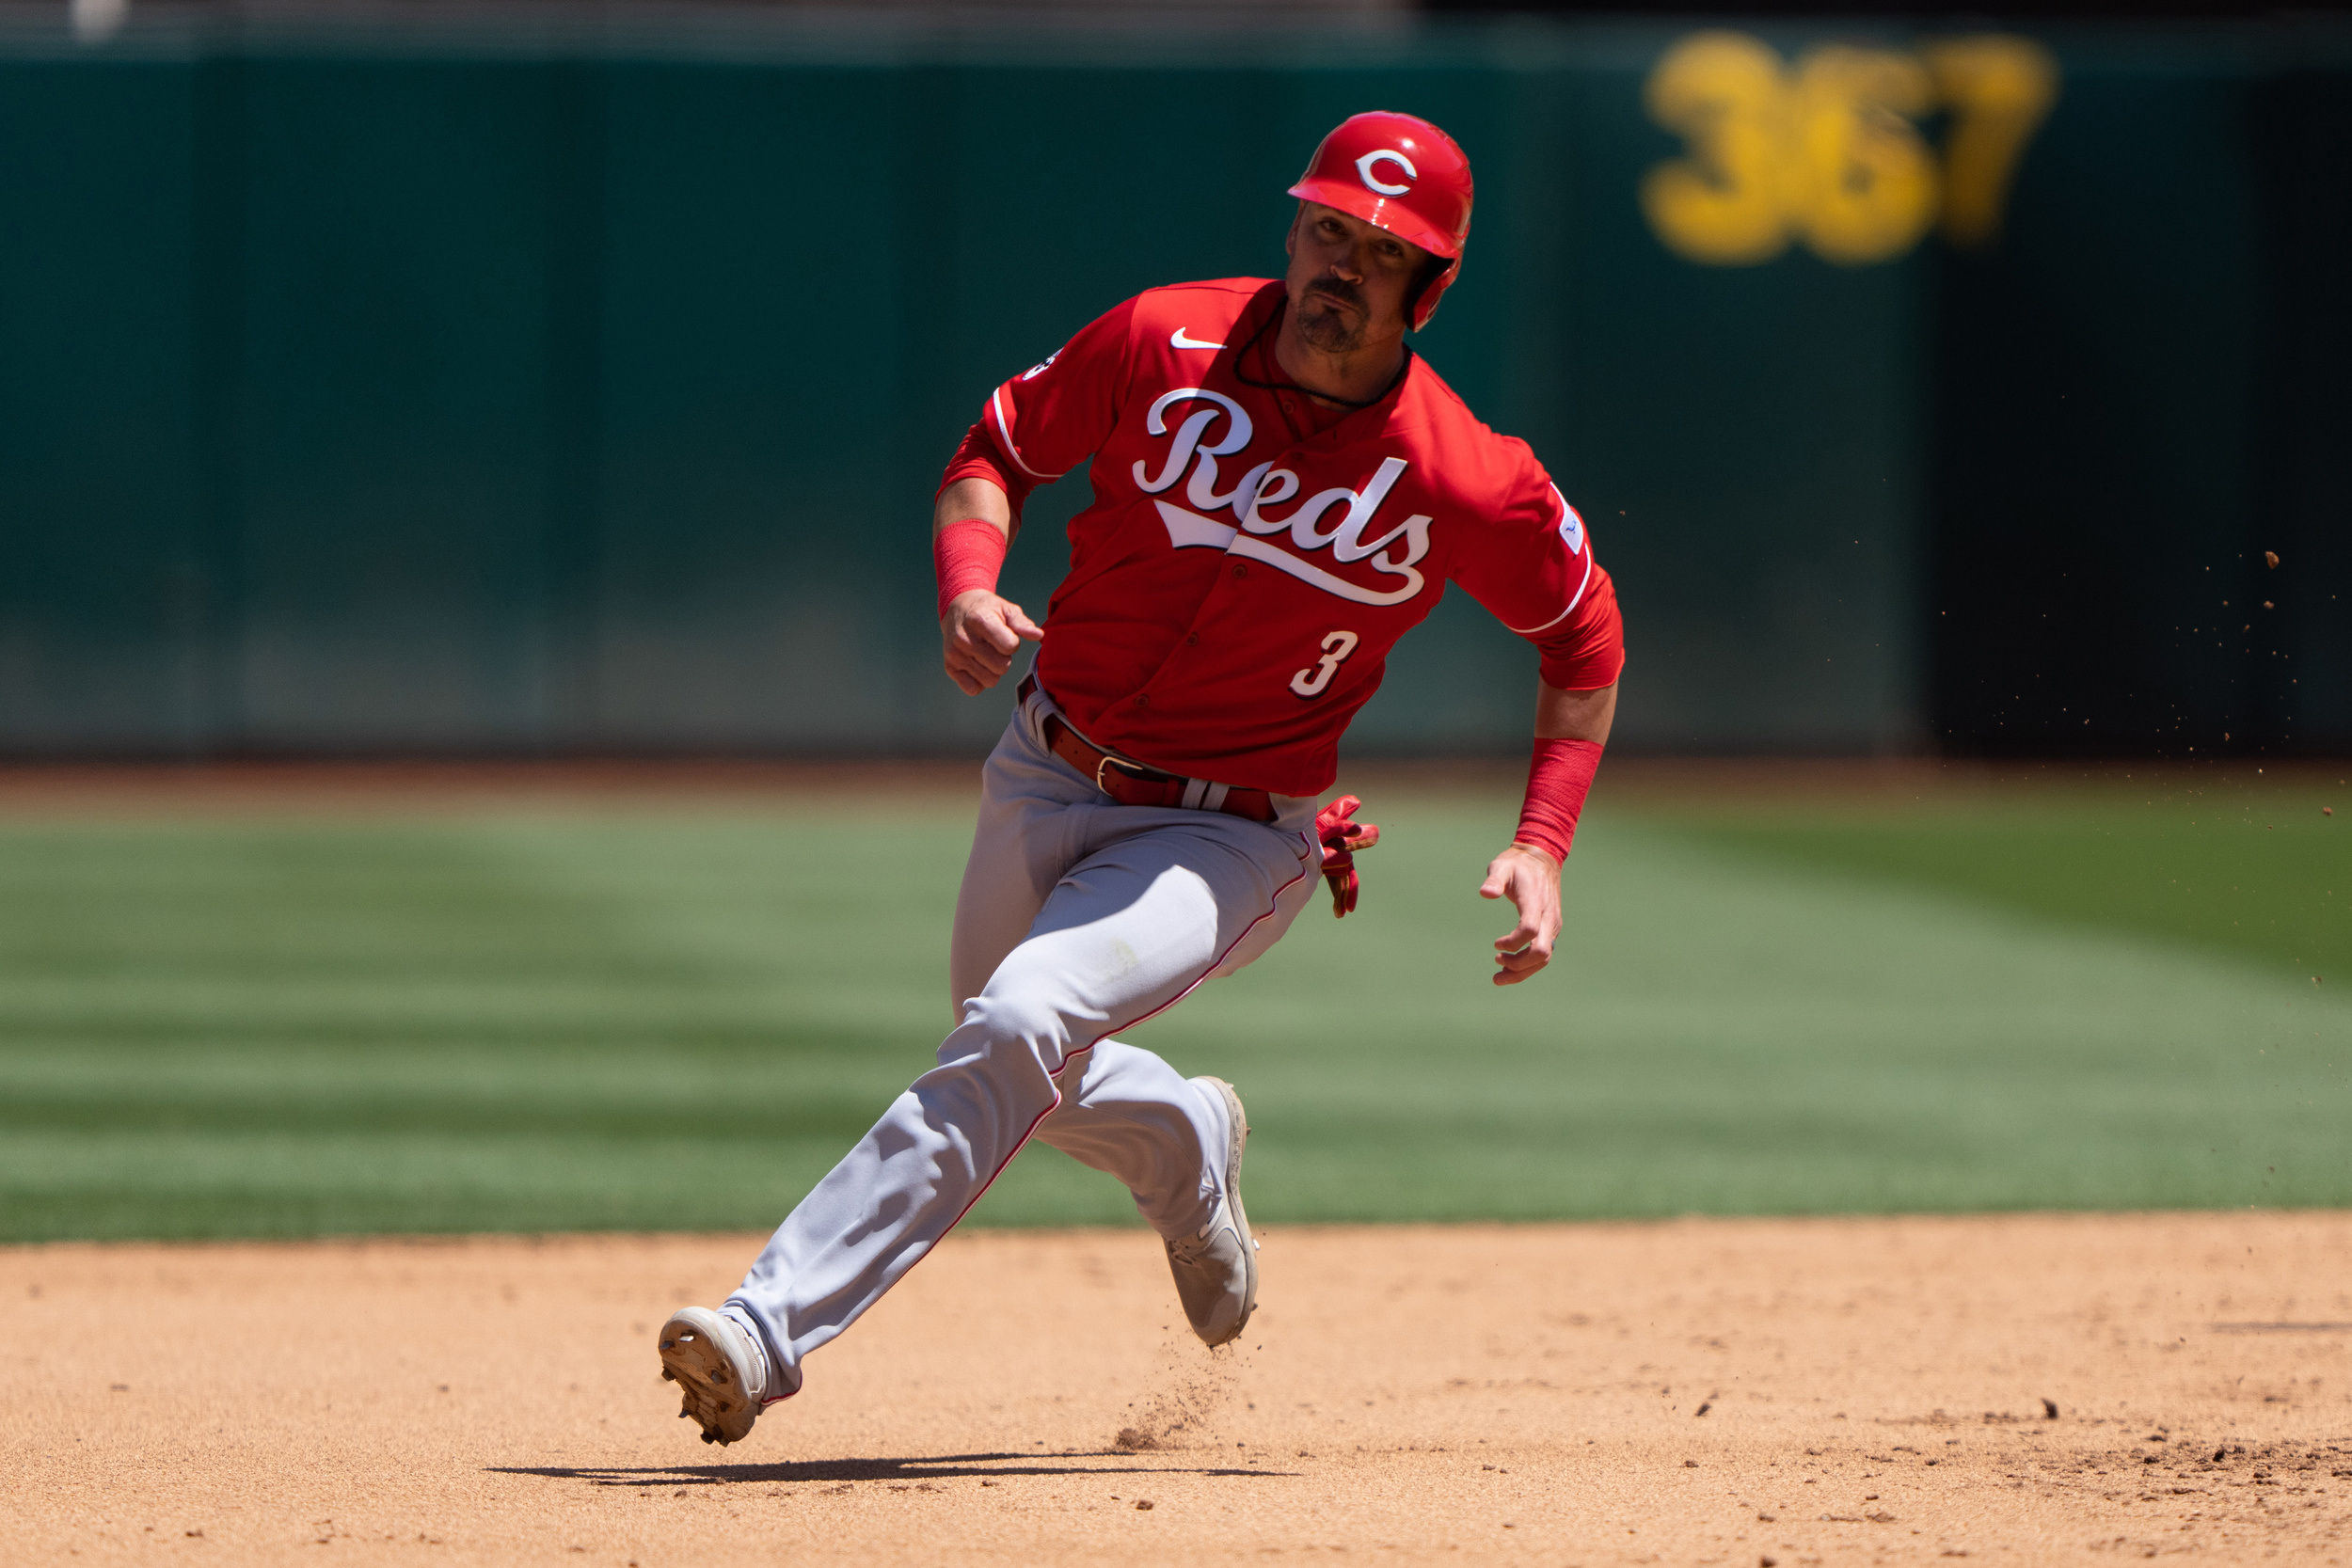 Reds sign free agent outfielder Myers